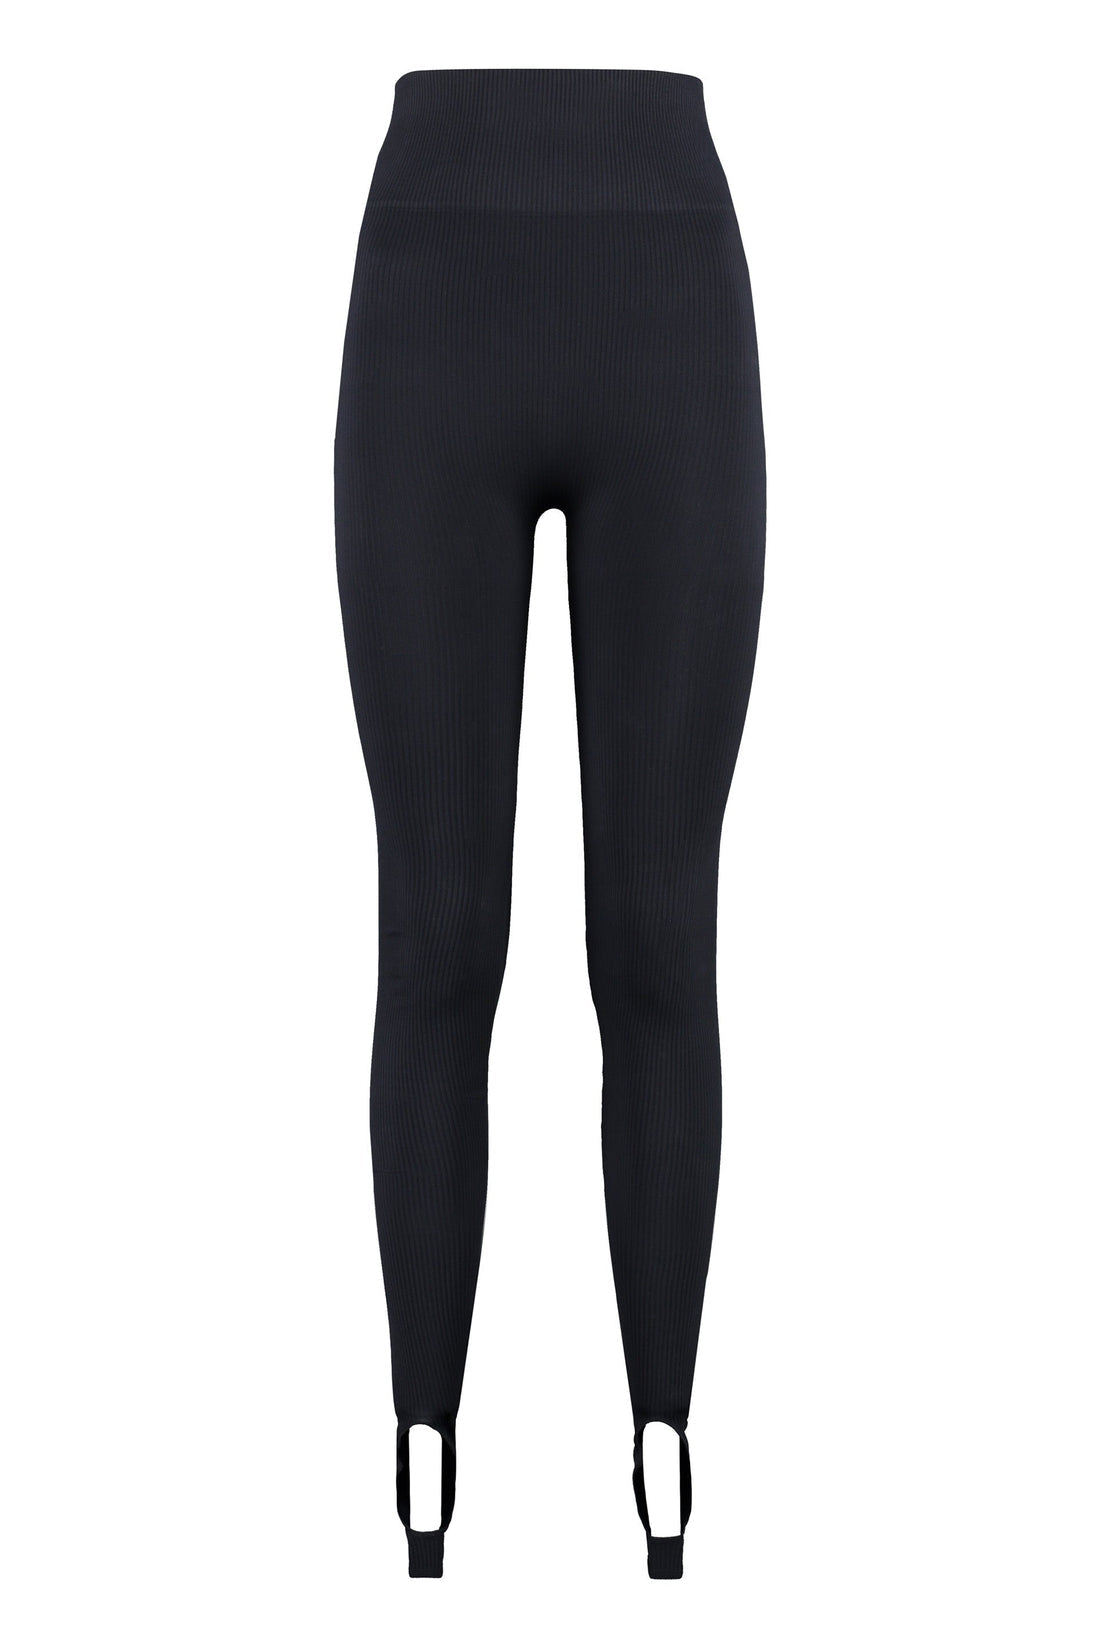 ANDREADAMO-OUTLET-SALE-Ribbed stretch leggings-ARCHIVIST